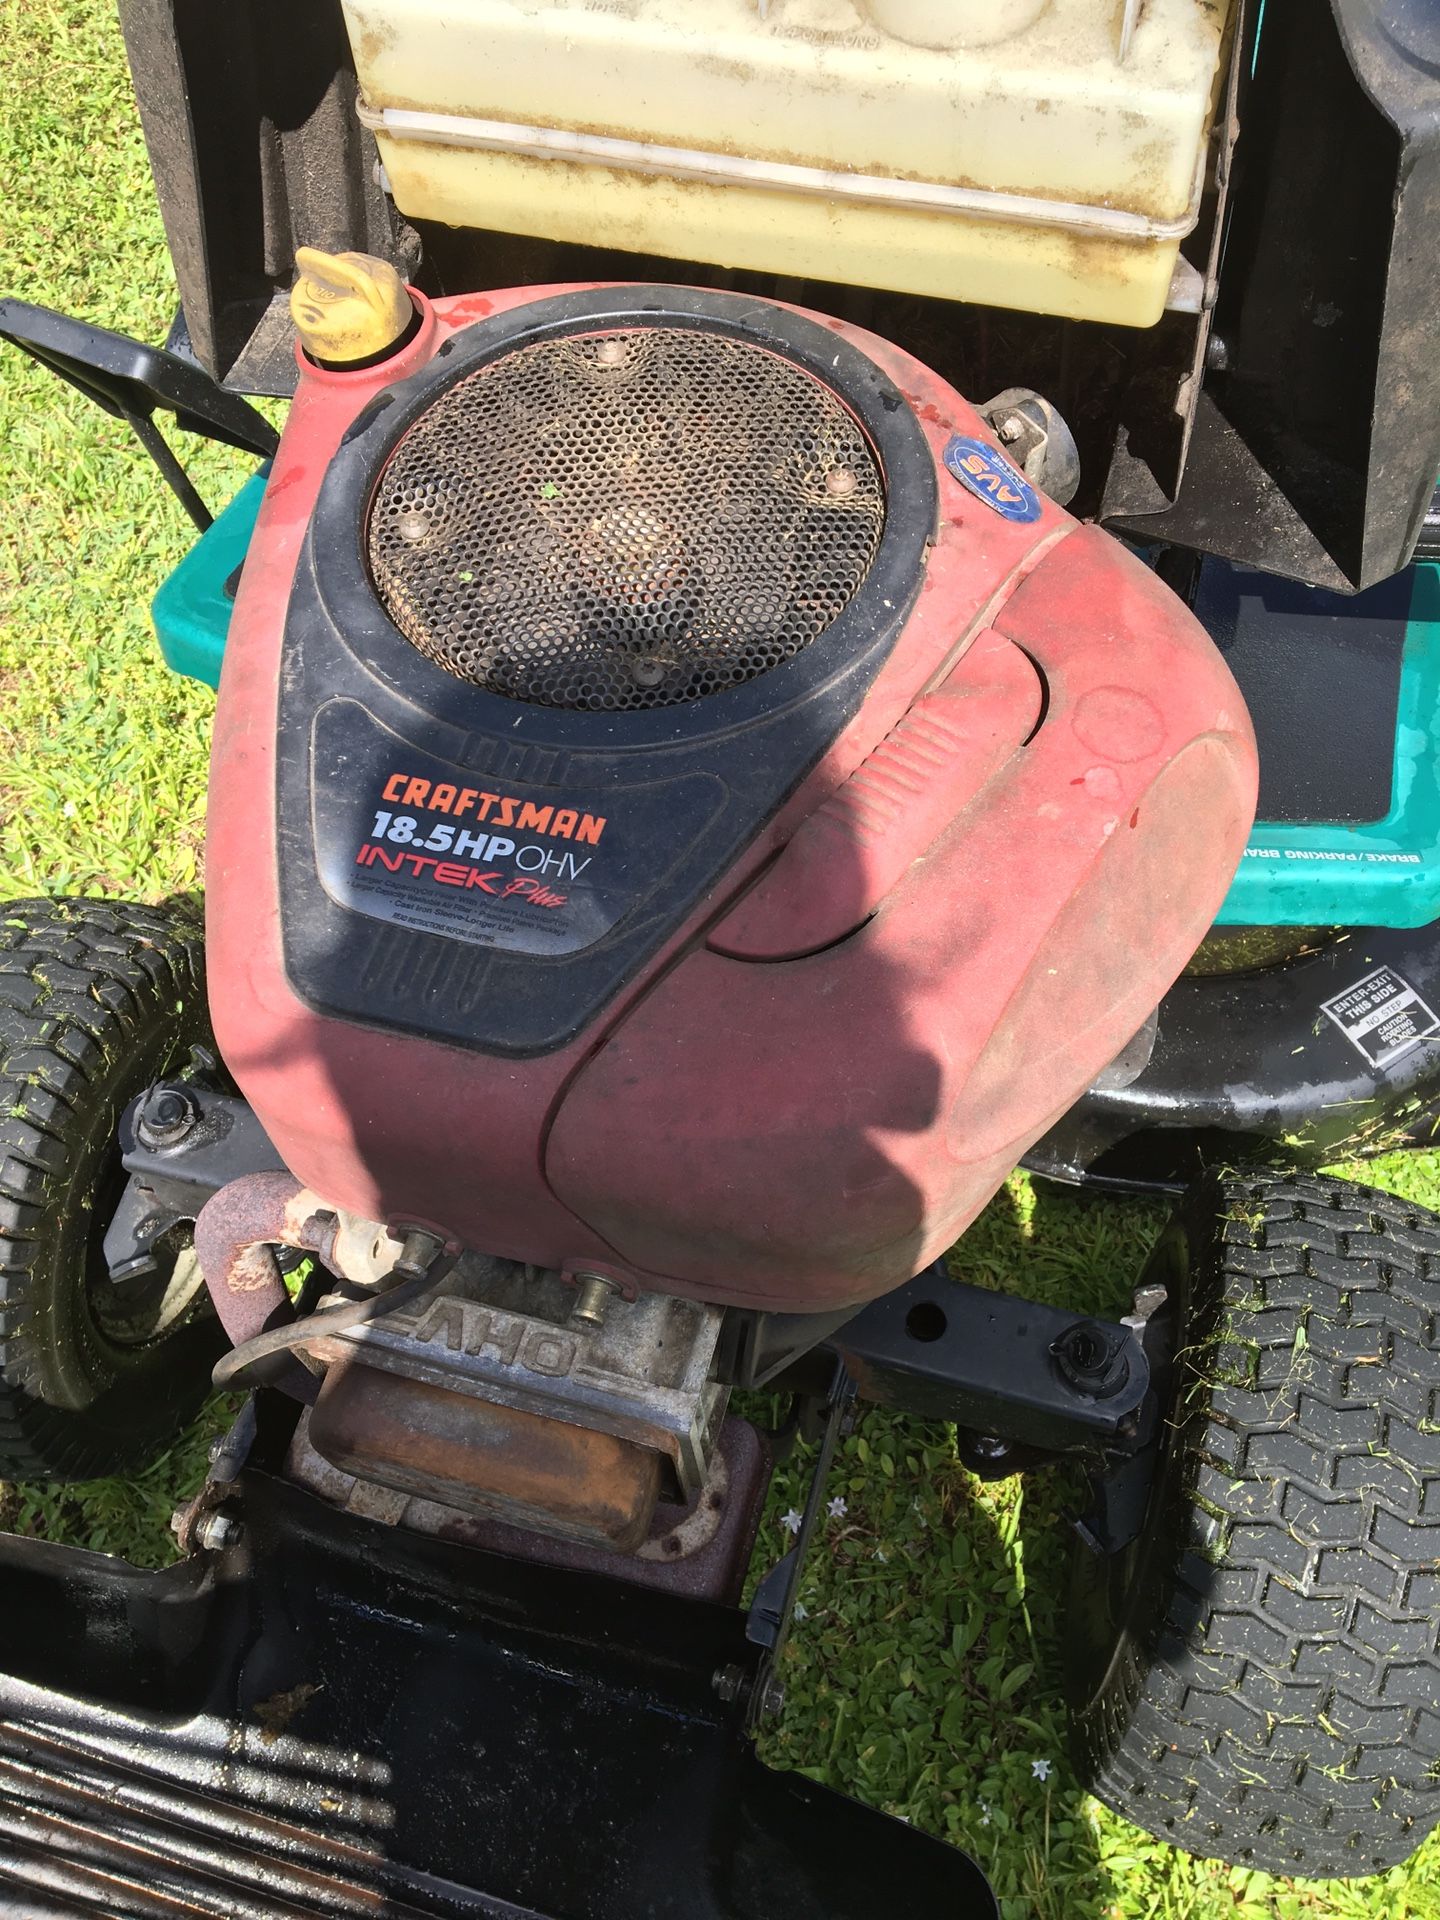 Used riding lawn mower